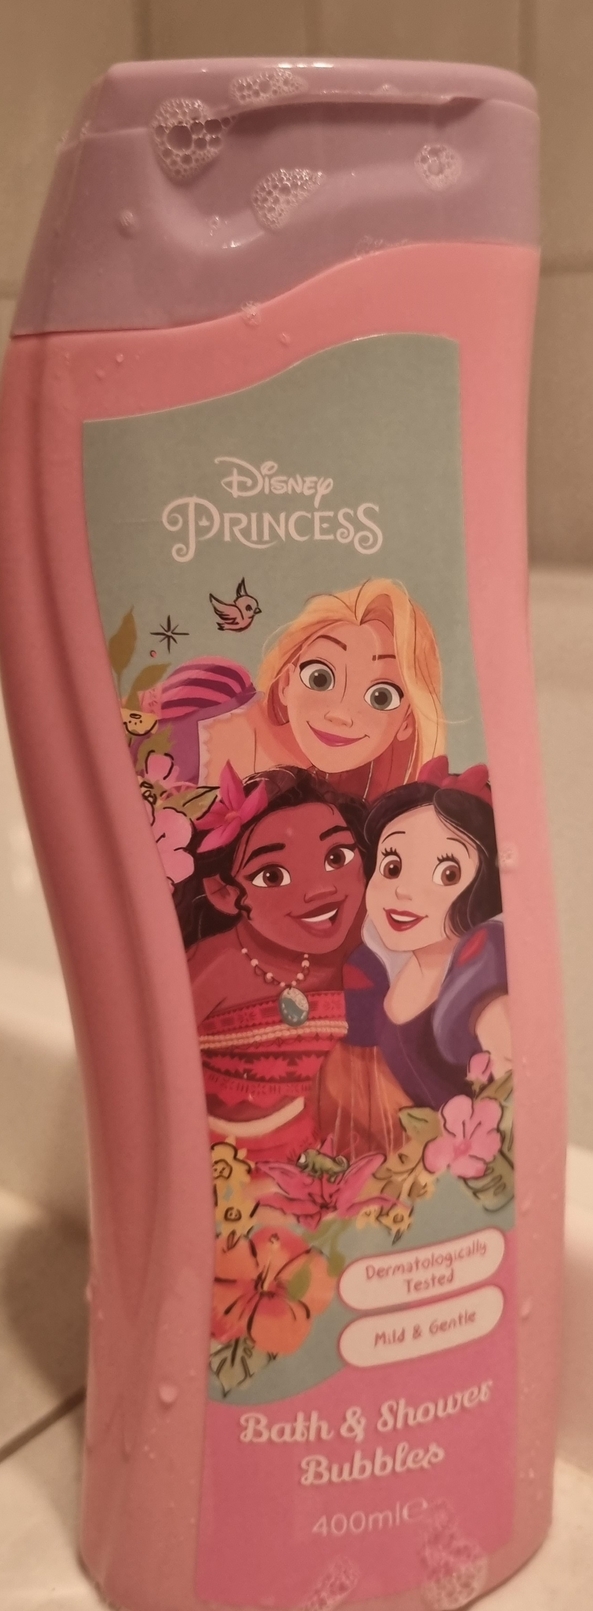 Mommy and me like Disney princess bath bubbles - Mommy gives her little girl a bubble bath to settle her down before bed, Xox, Adult Babies,Wetting The Bed,Thumb Sucking